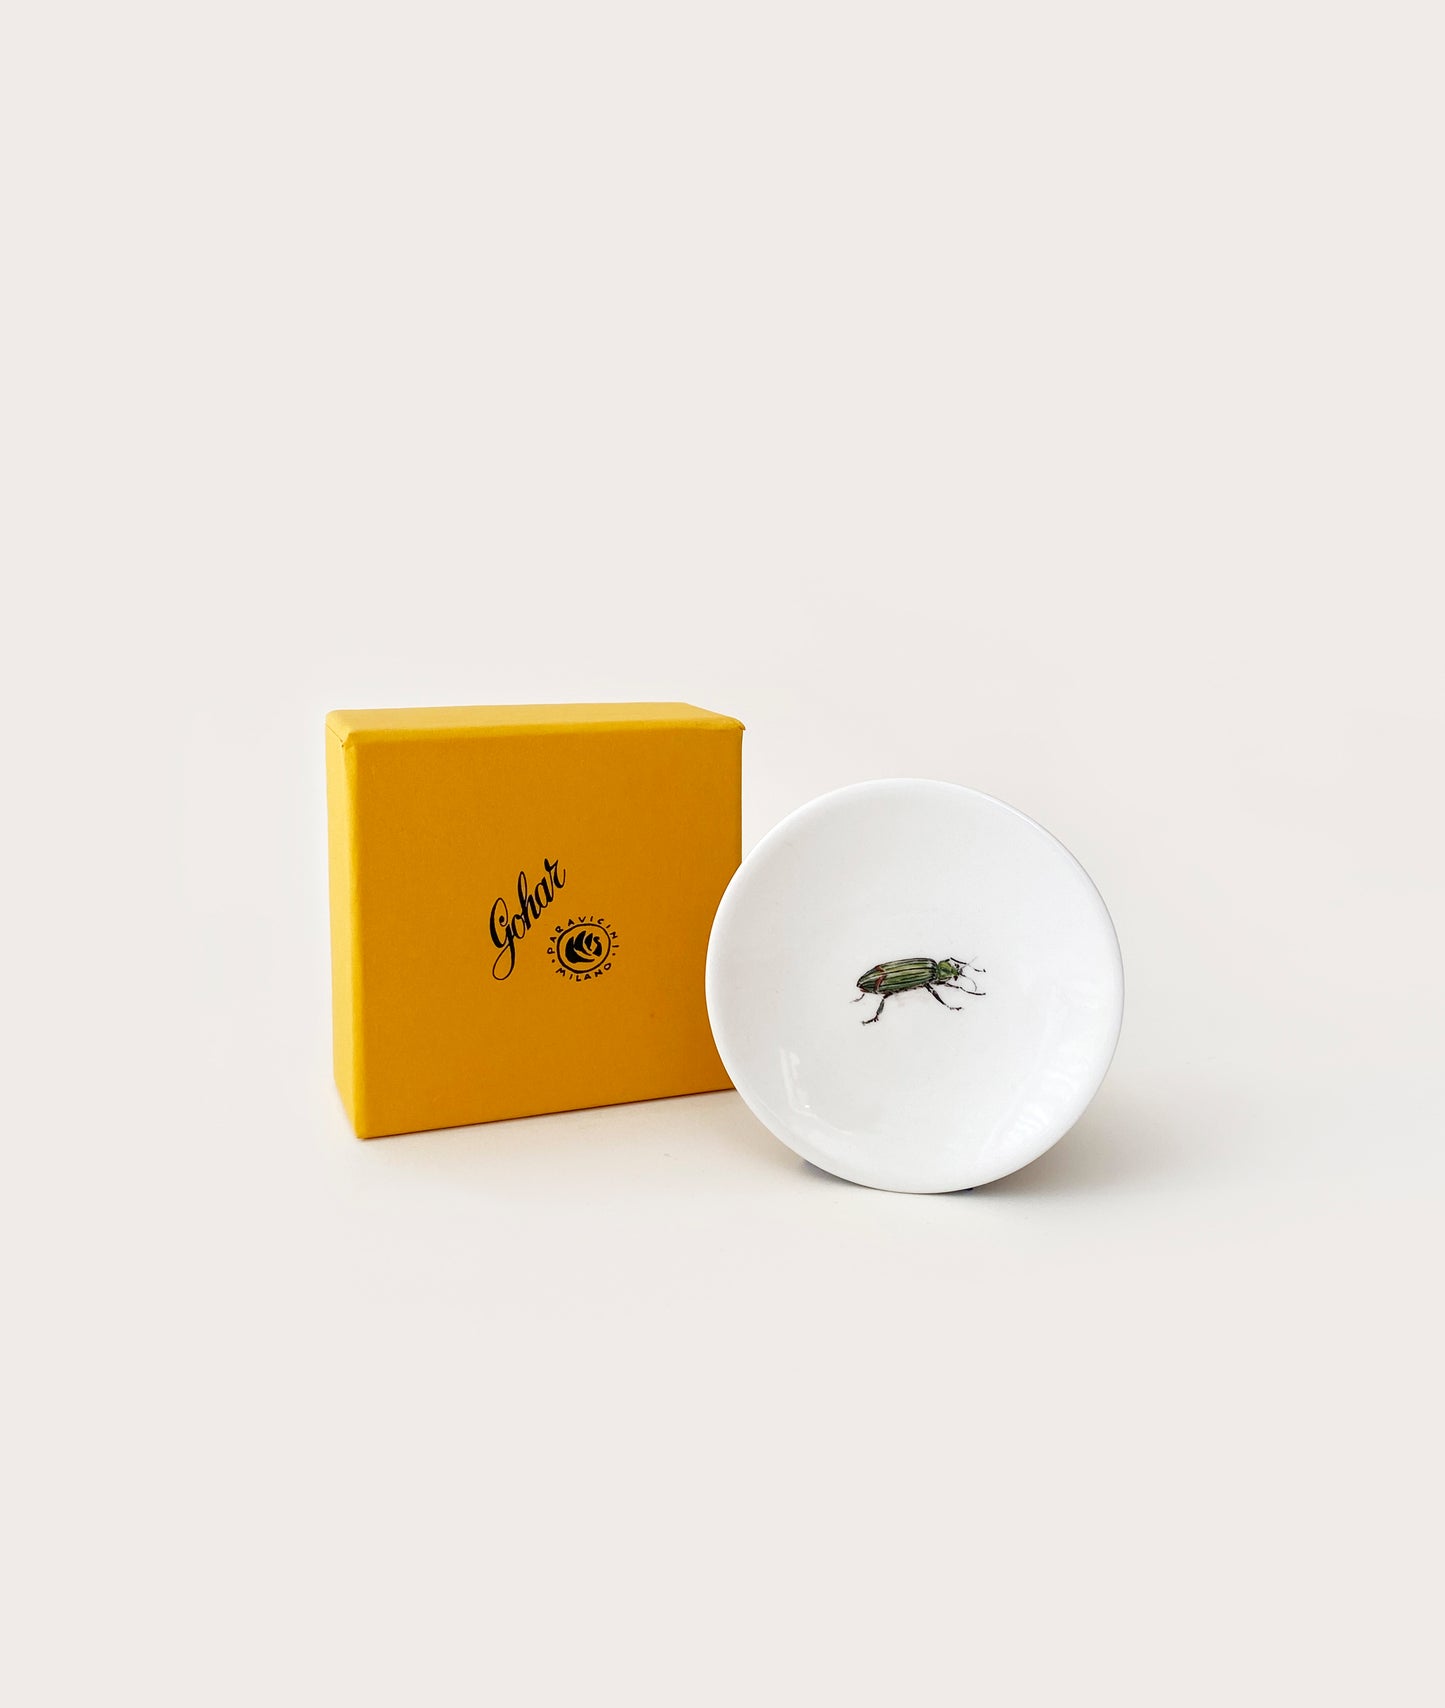 Tiny Plate with Bug Trompe L'oeil